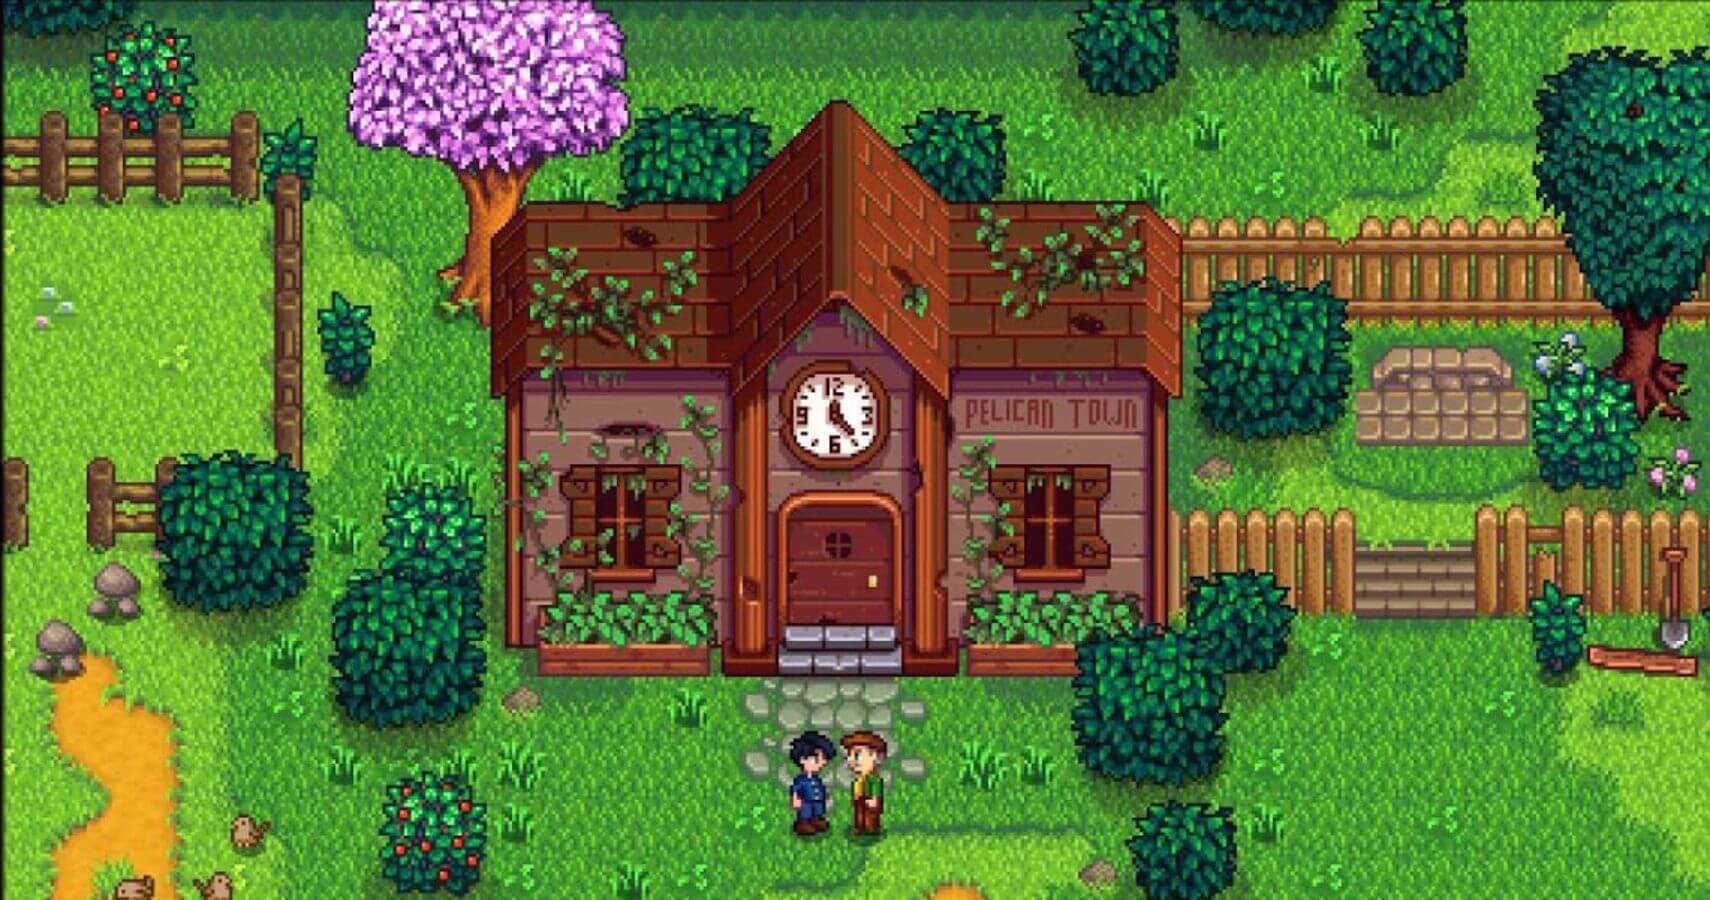 How to marry Shane in the Stardew Valley